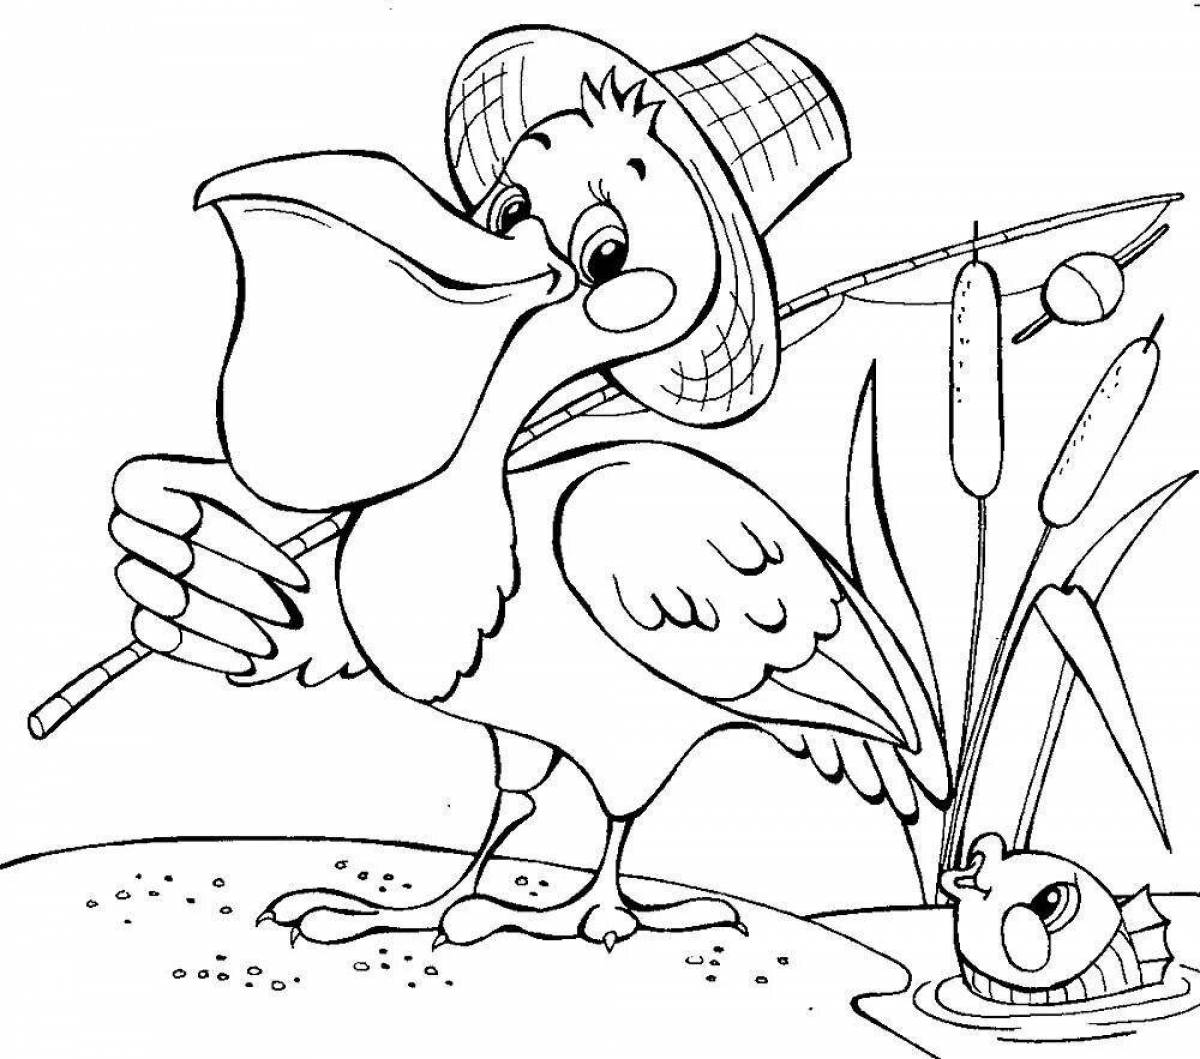 Cute pelican coloring pages for kids